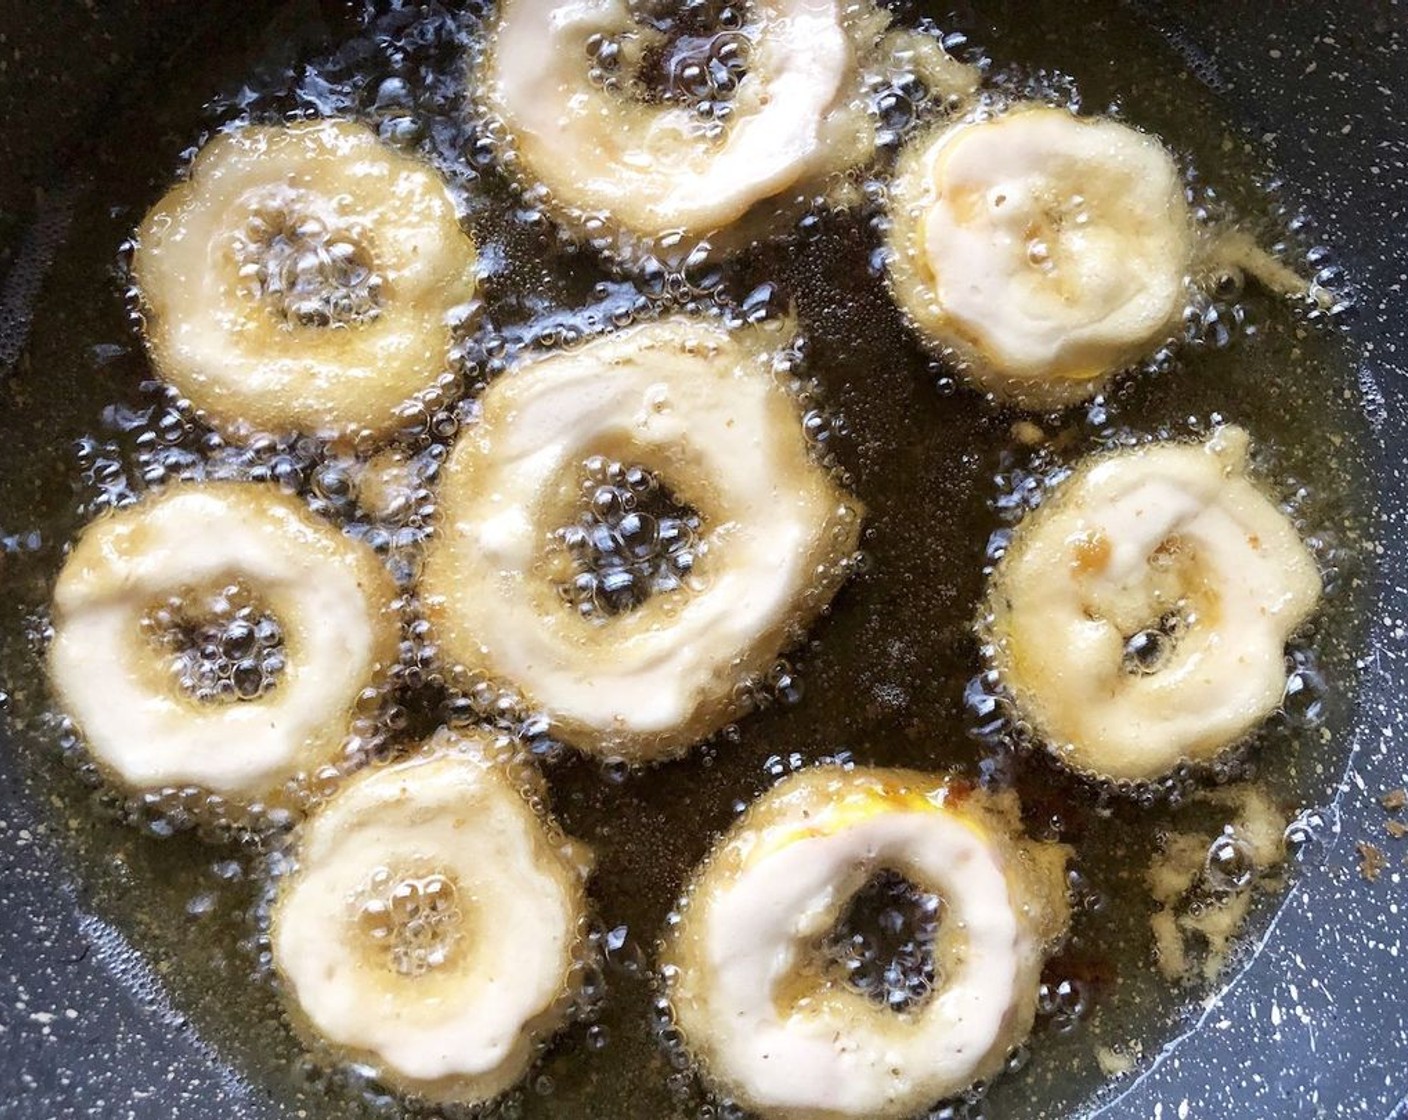 step 6 Fry the rings until golden, about 1 to 1 1/2 minutes on each side. Remove and drain on a rack or a paper towel-lined plate.